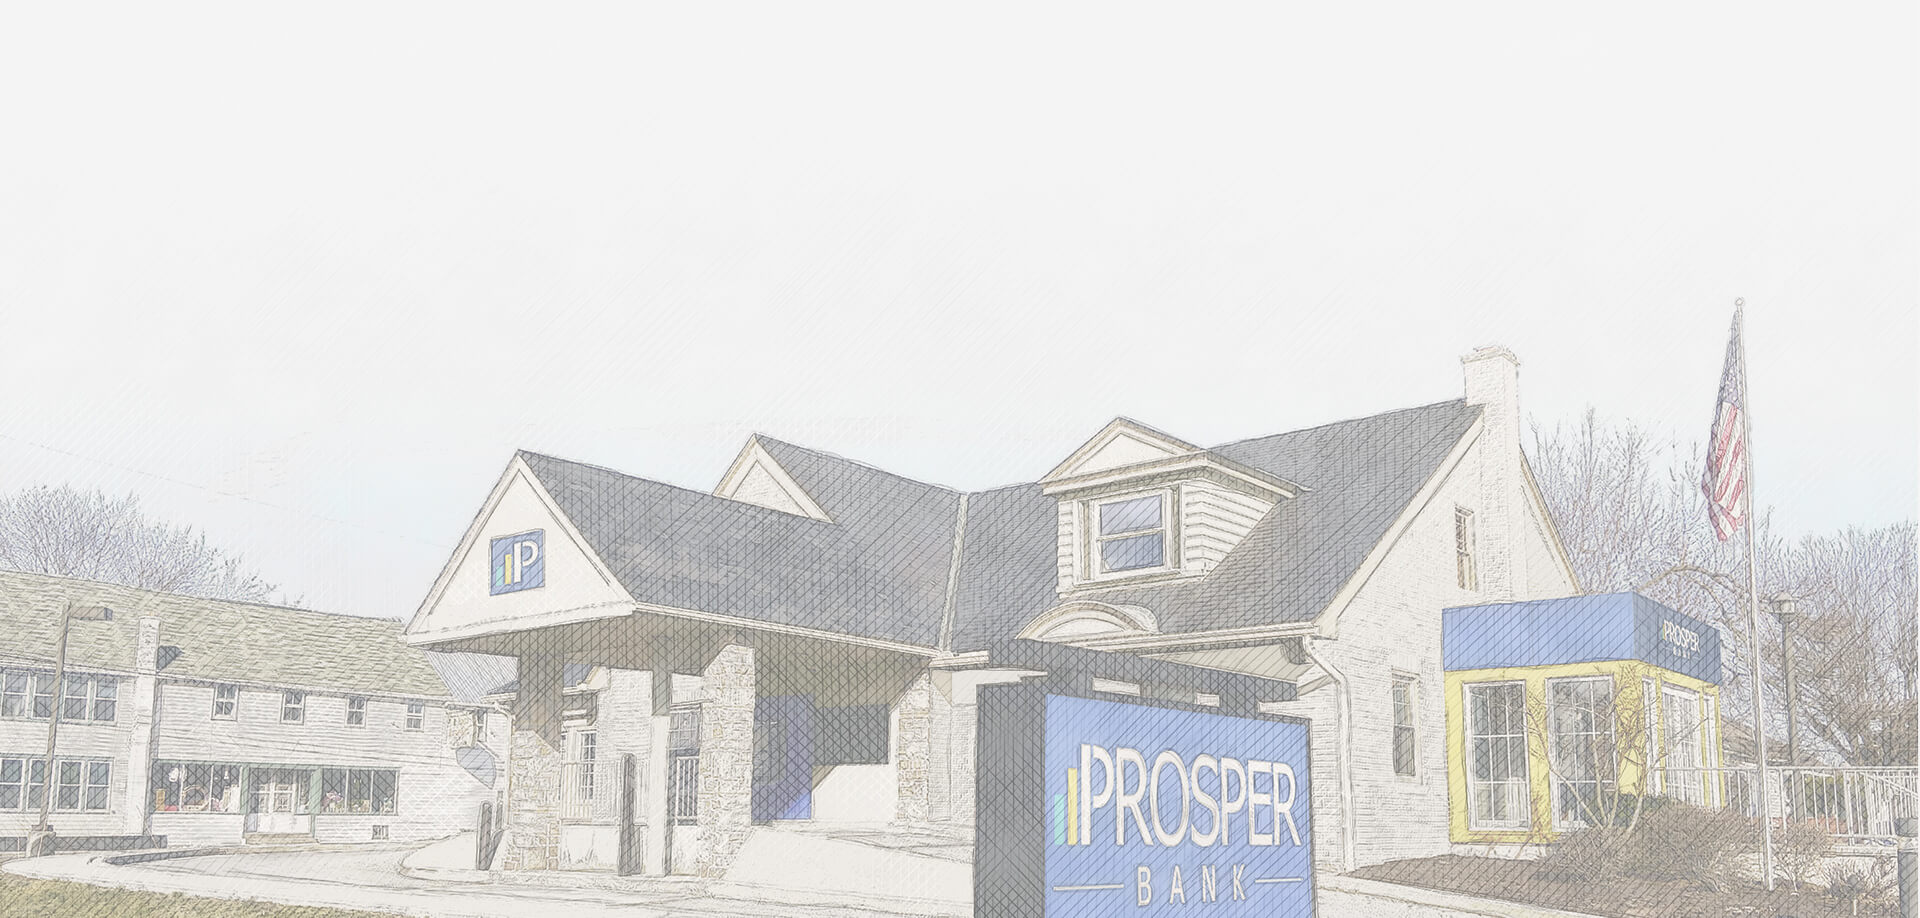 Rendering of Prosper Bank Location with Signage